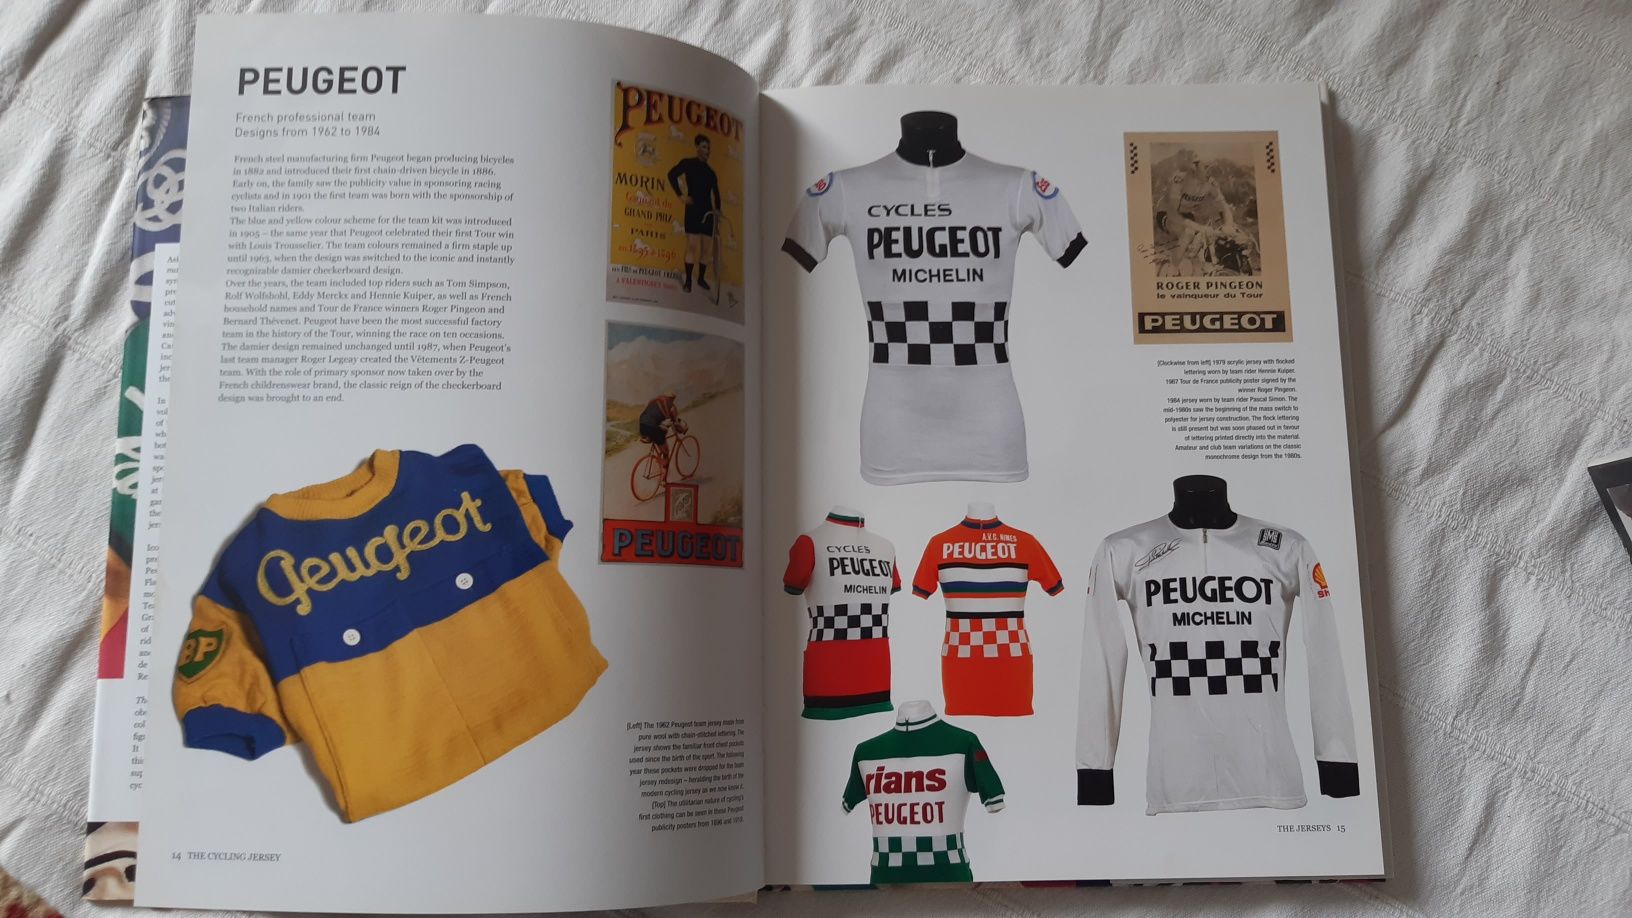 The Cycling Jersey